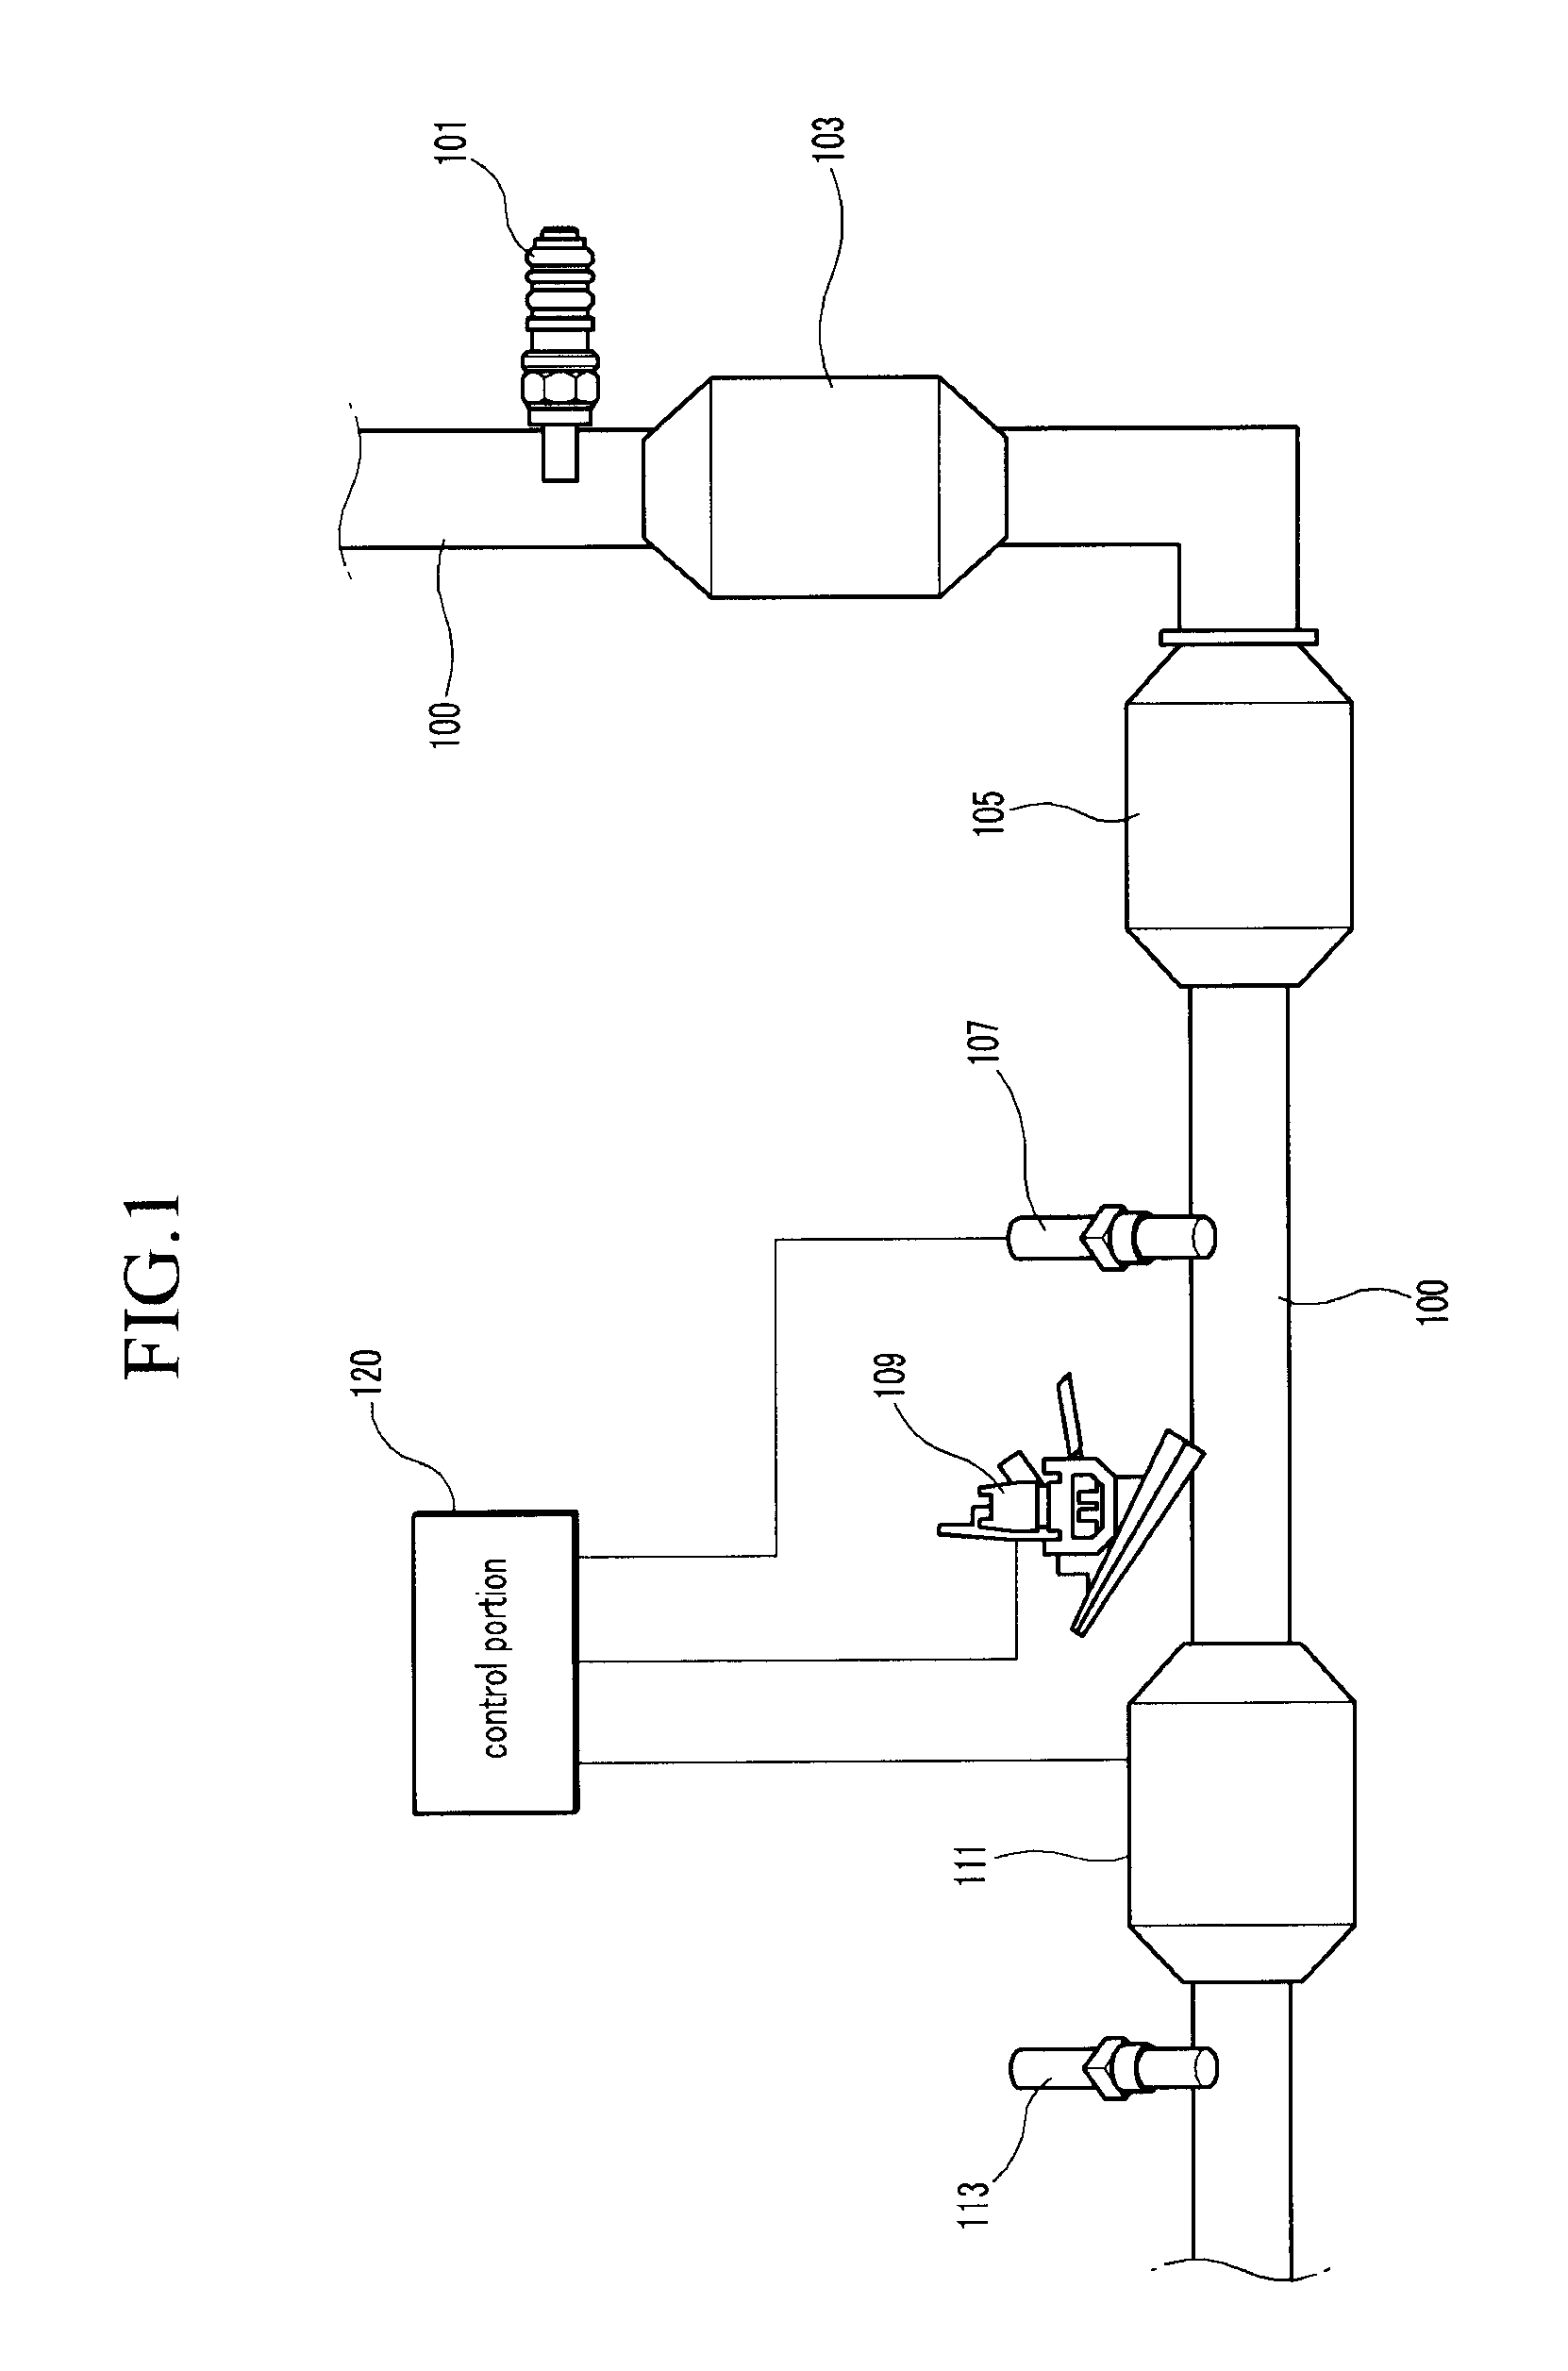 Method for determining malfunction of nitrogen oxide sensor and selective catalytic reduction system operating the same